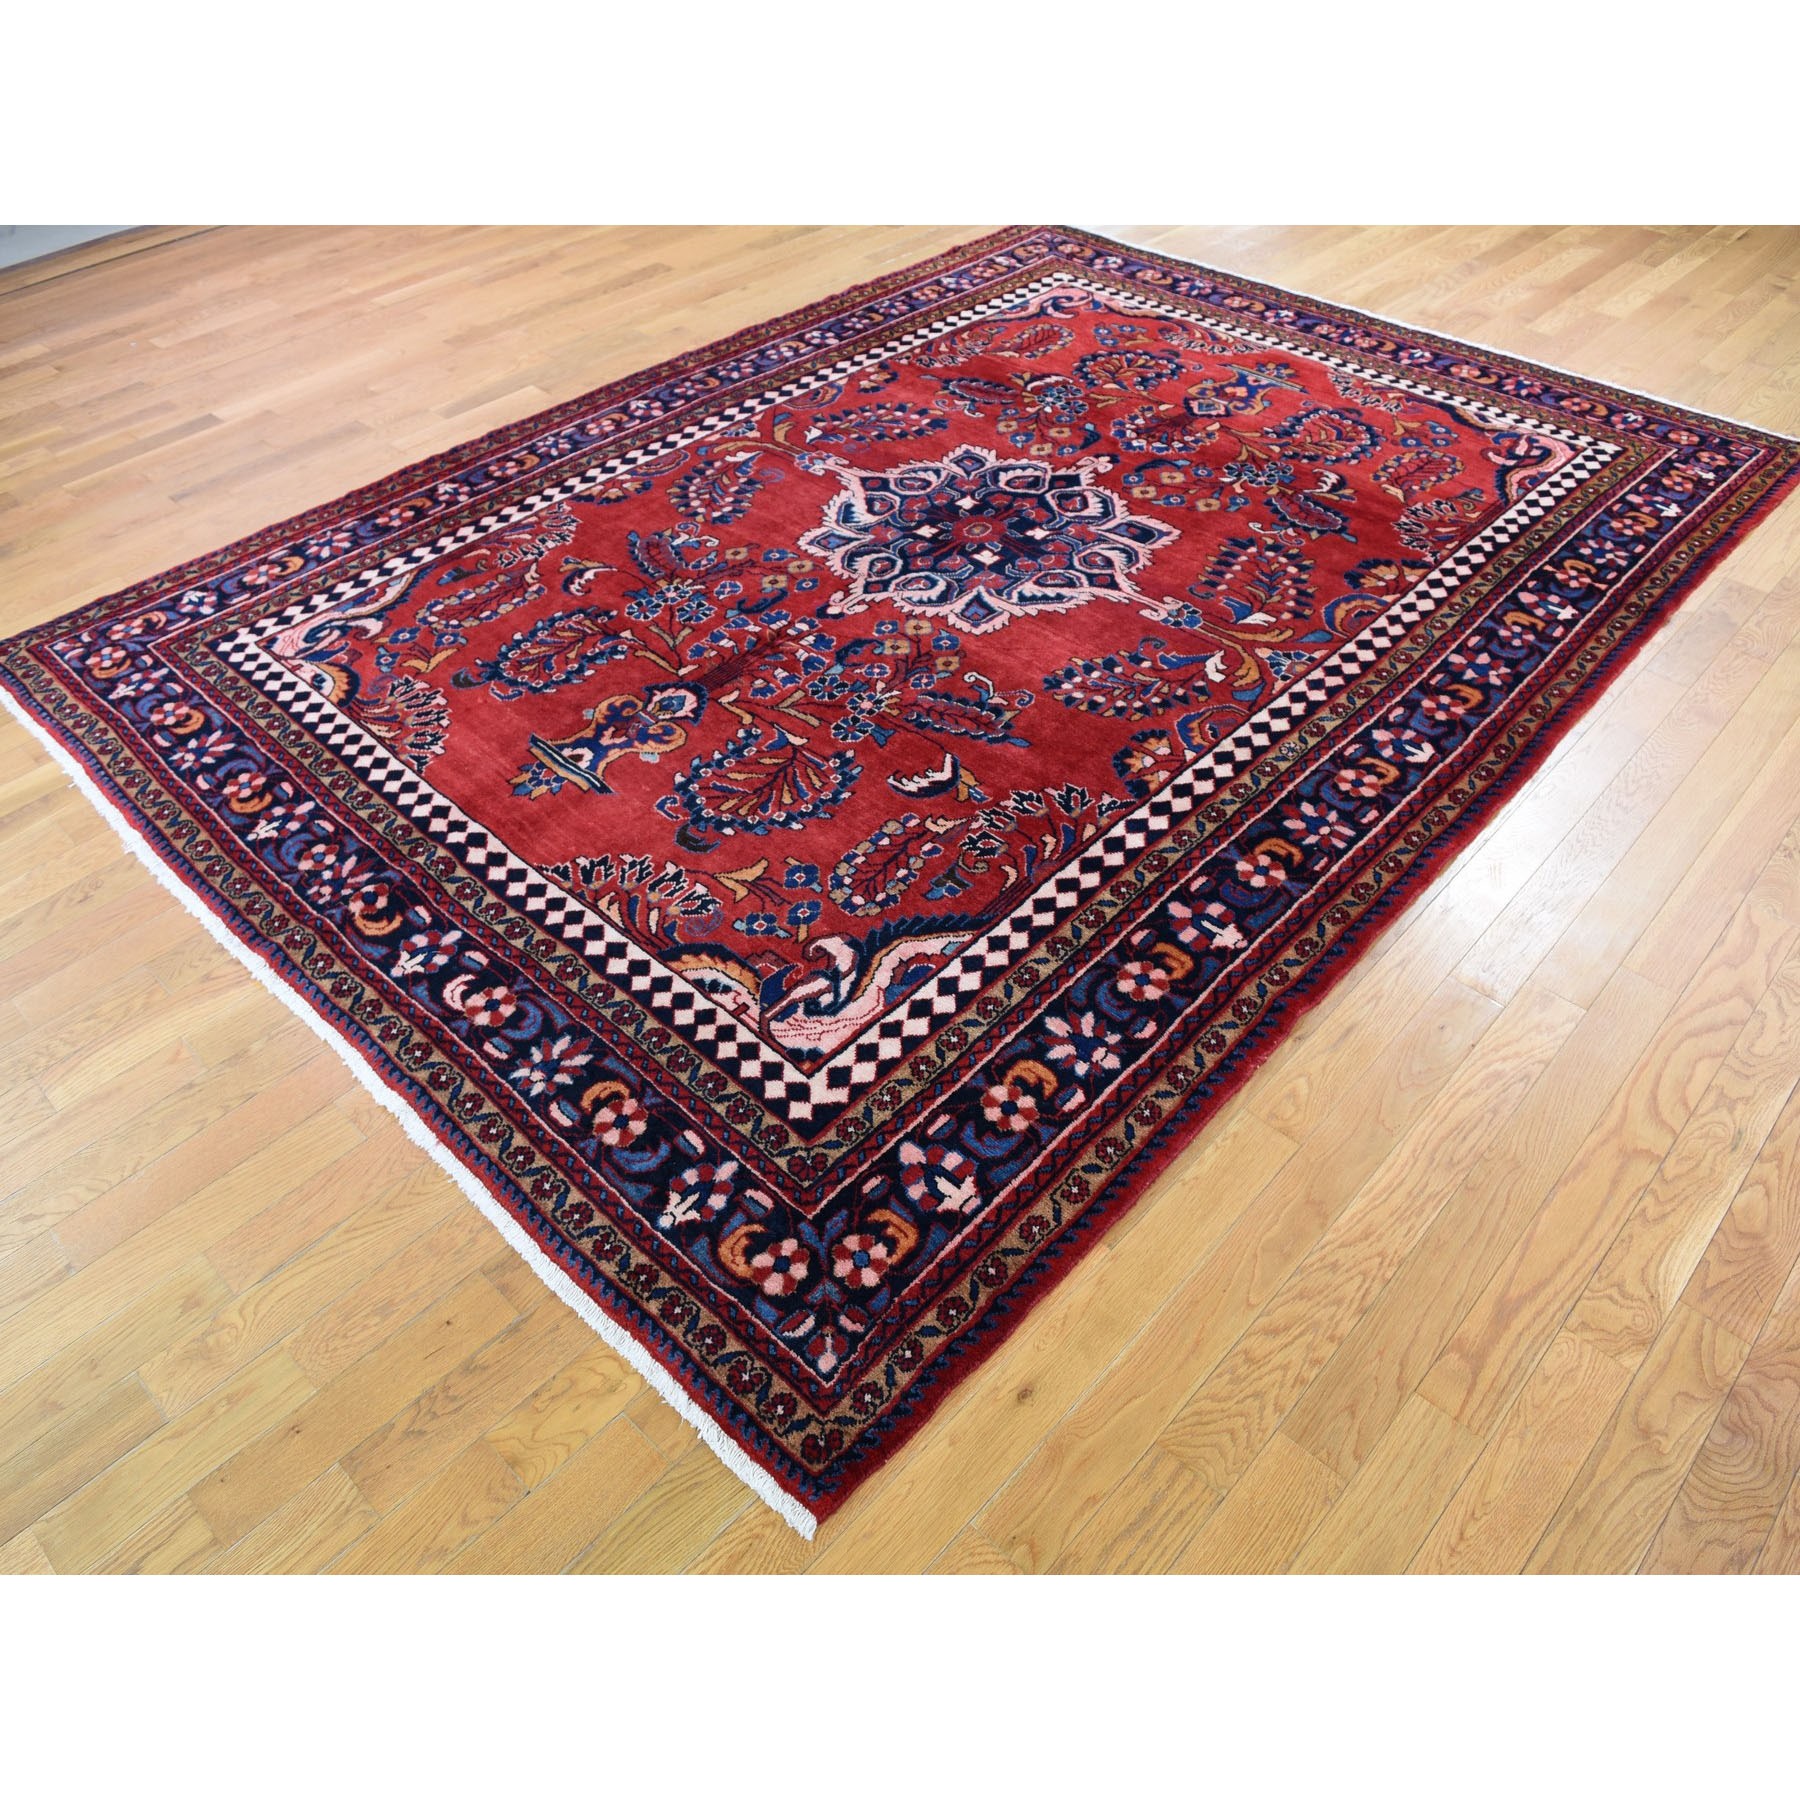 7'4"x10'2" Red New Persian Lilihan Pure Wool Hand Woven Oriental Rug 